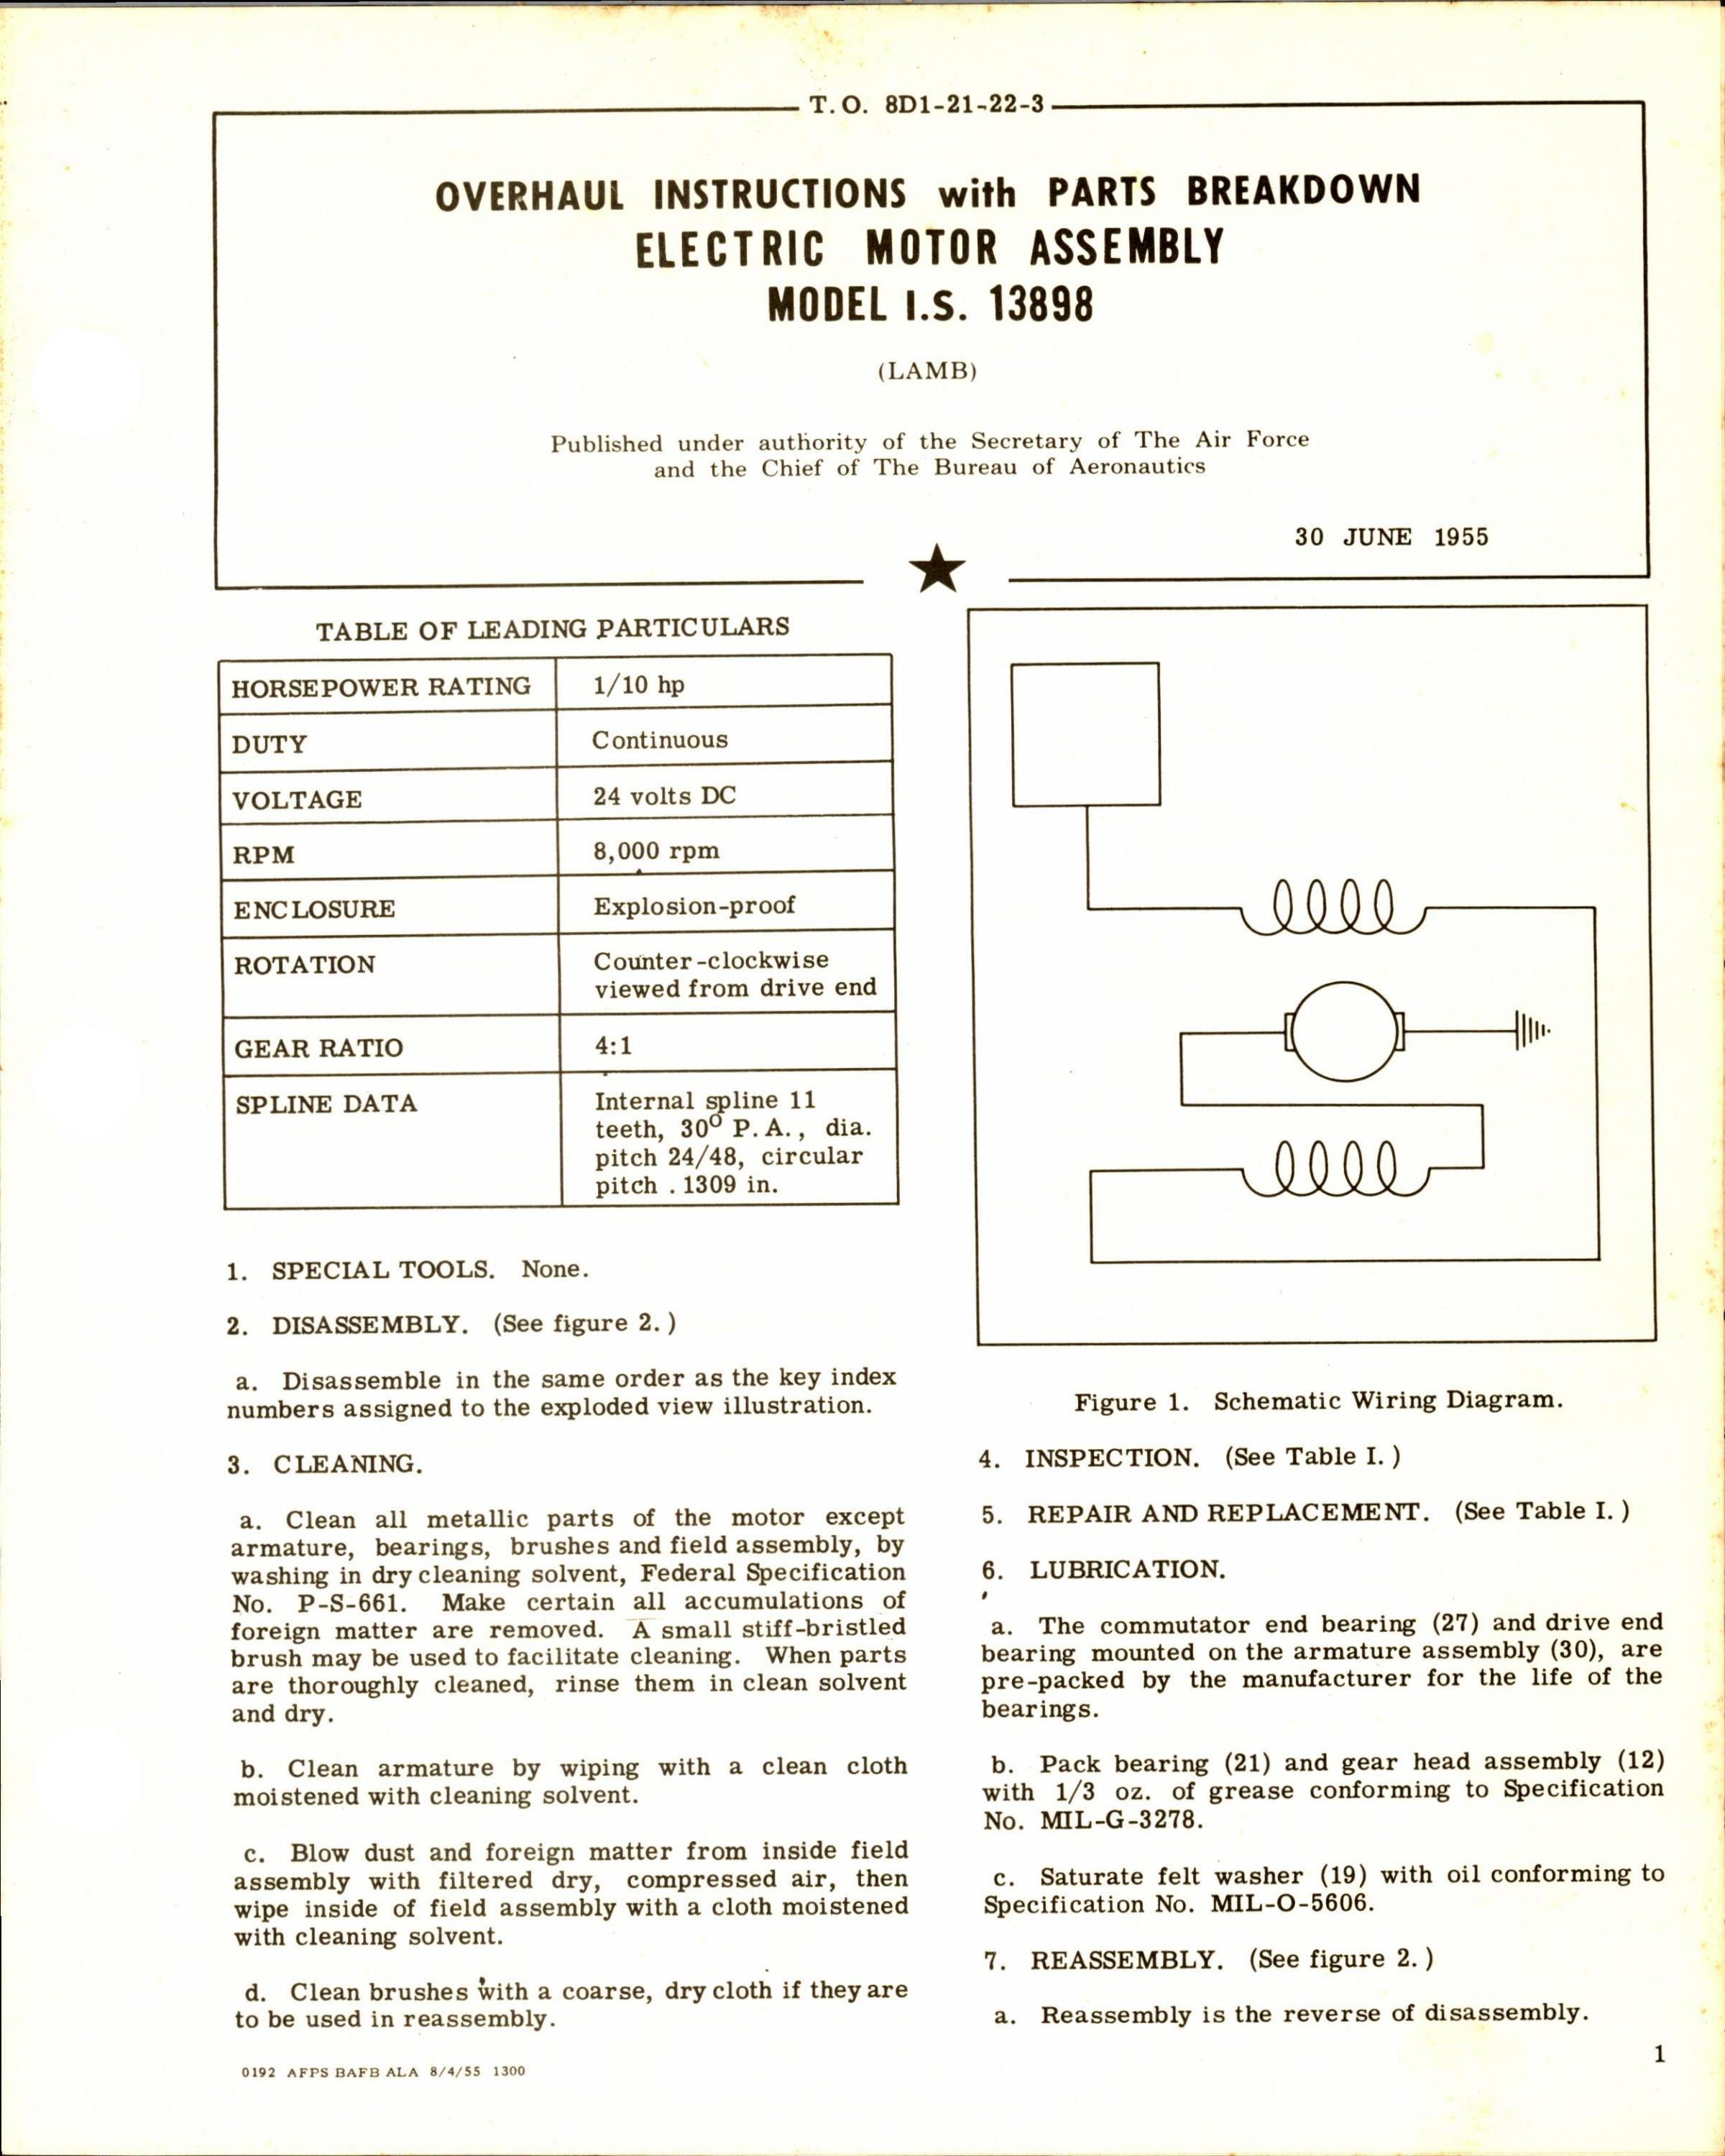 Sample page 1 from AirCorps Library document: Overhaul Instructions with Parts Breakdown for Electric Motor Assembly Model I.S. 13898